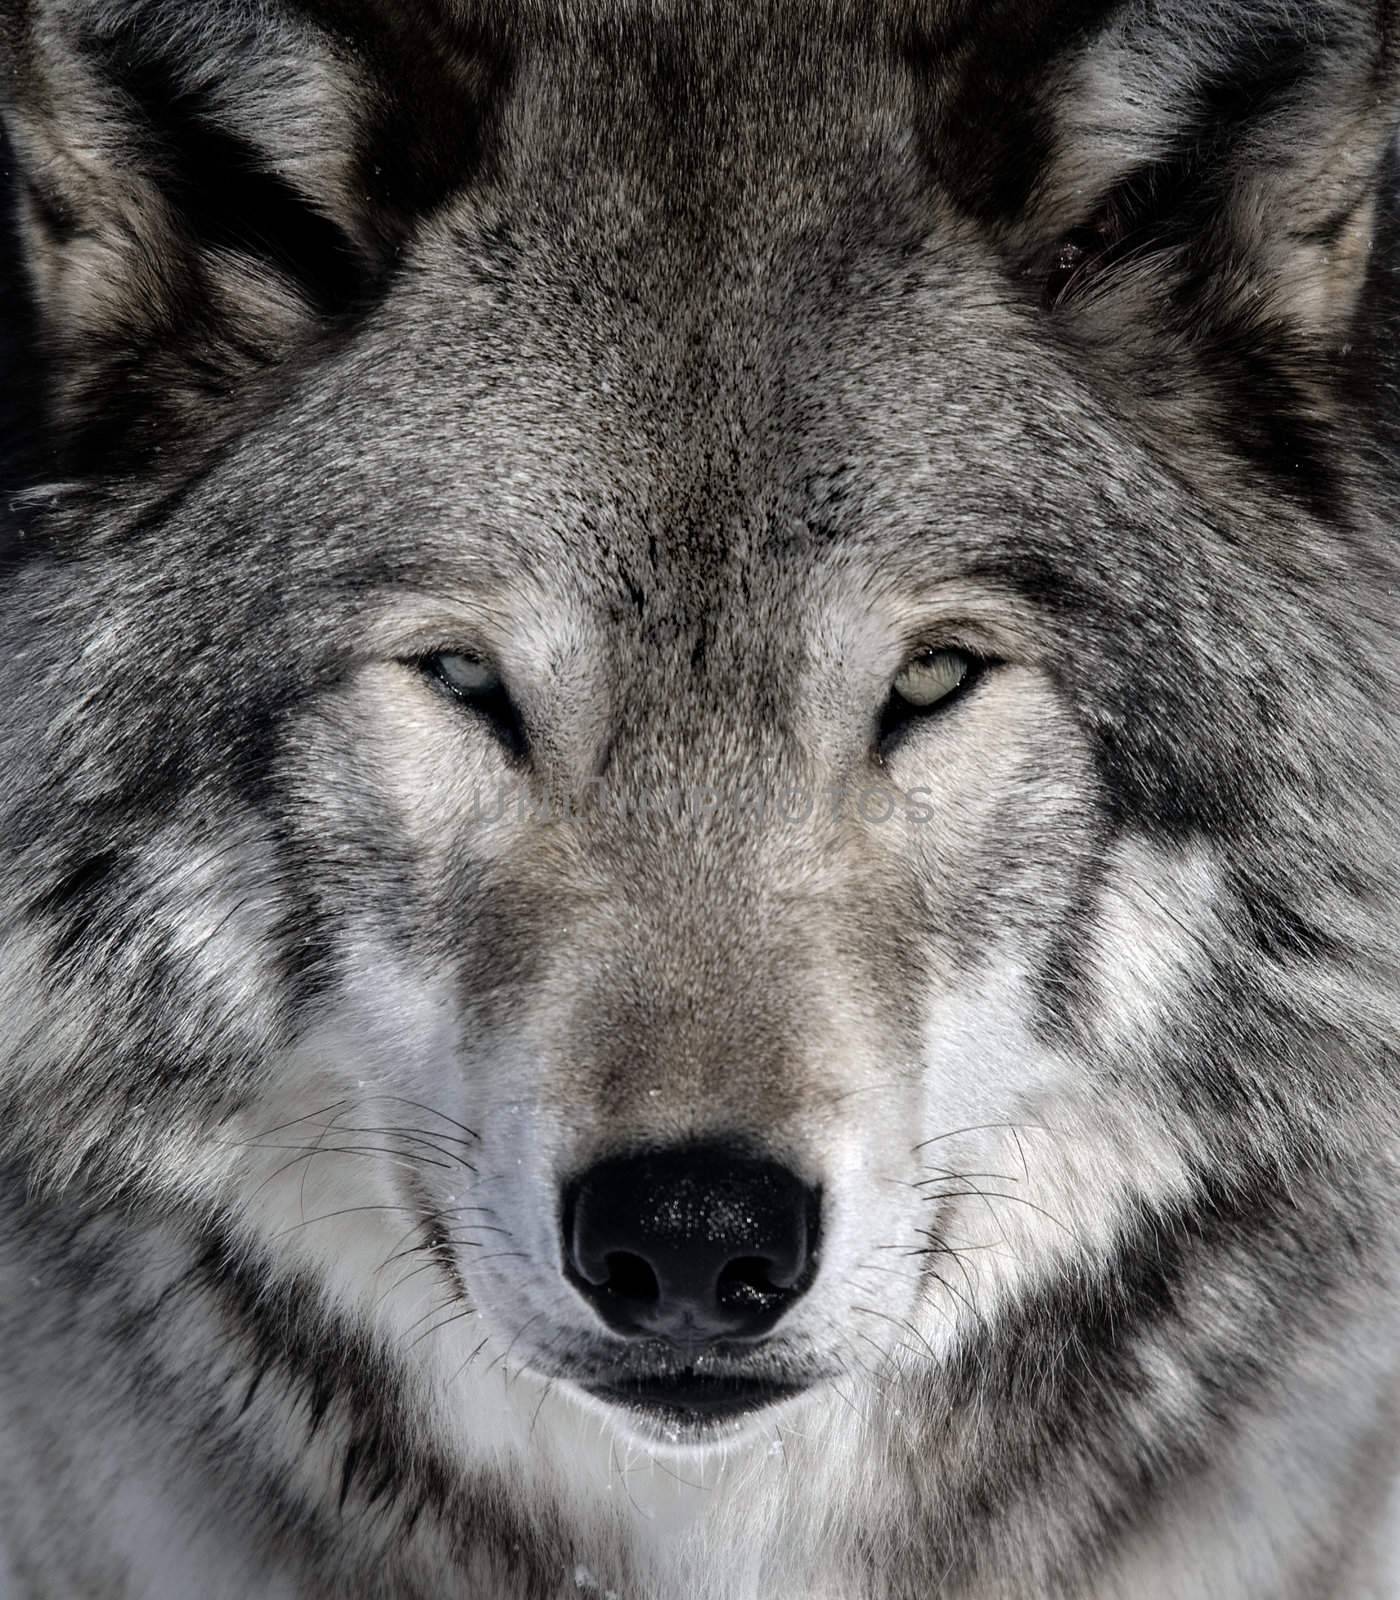 Close-up portrait of a gray wolf